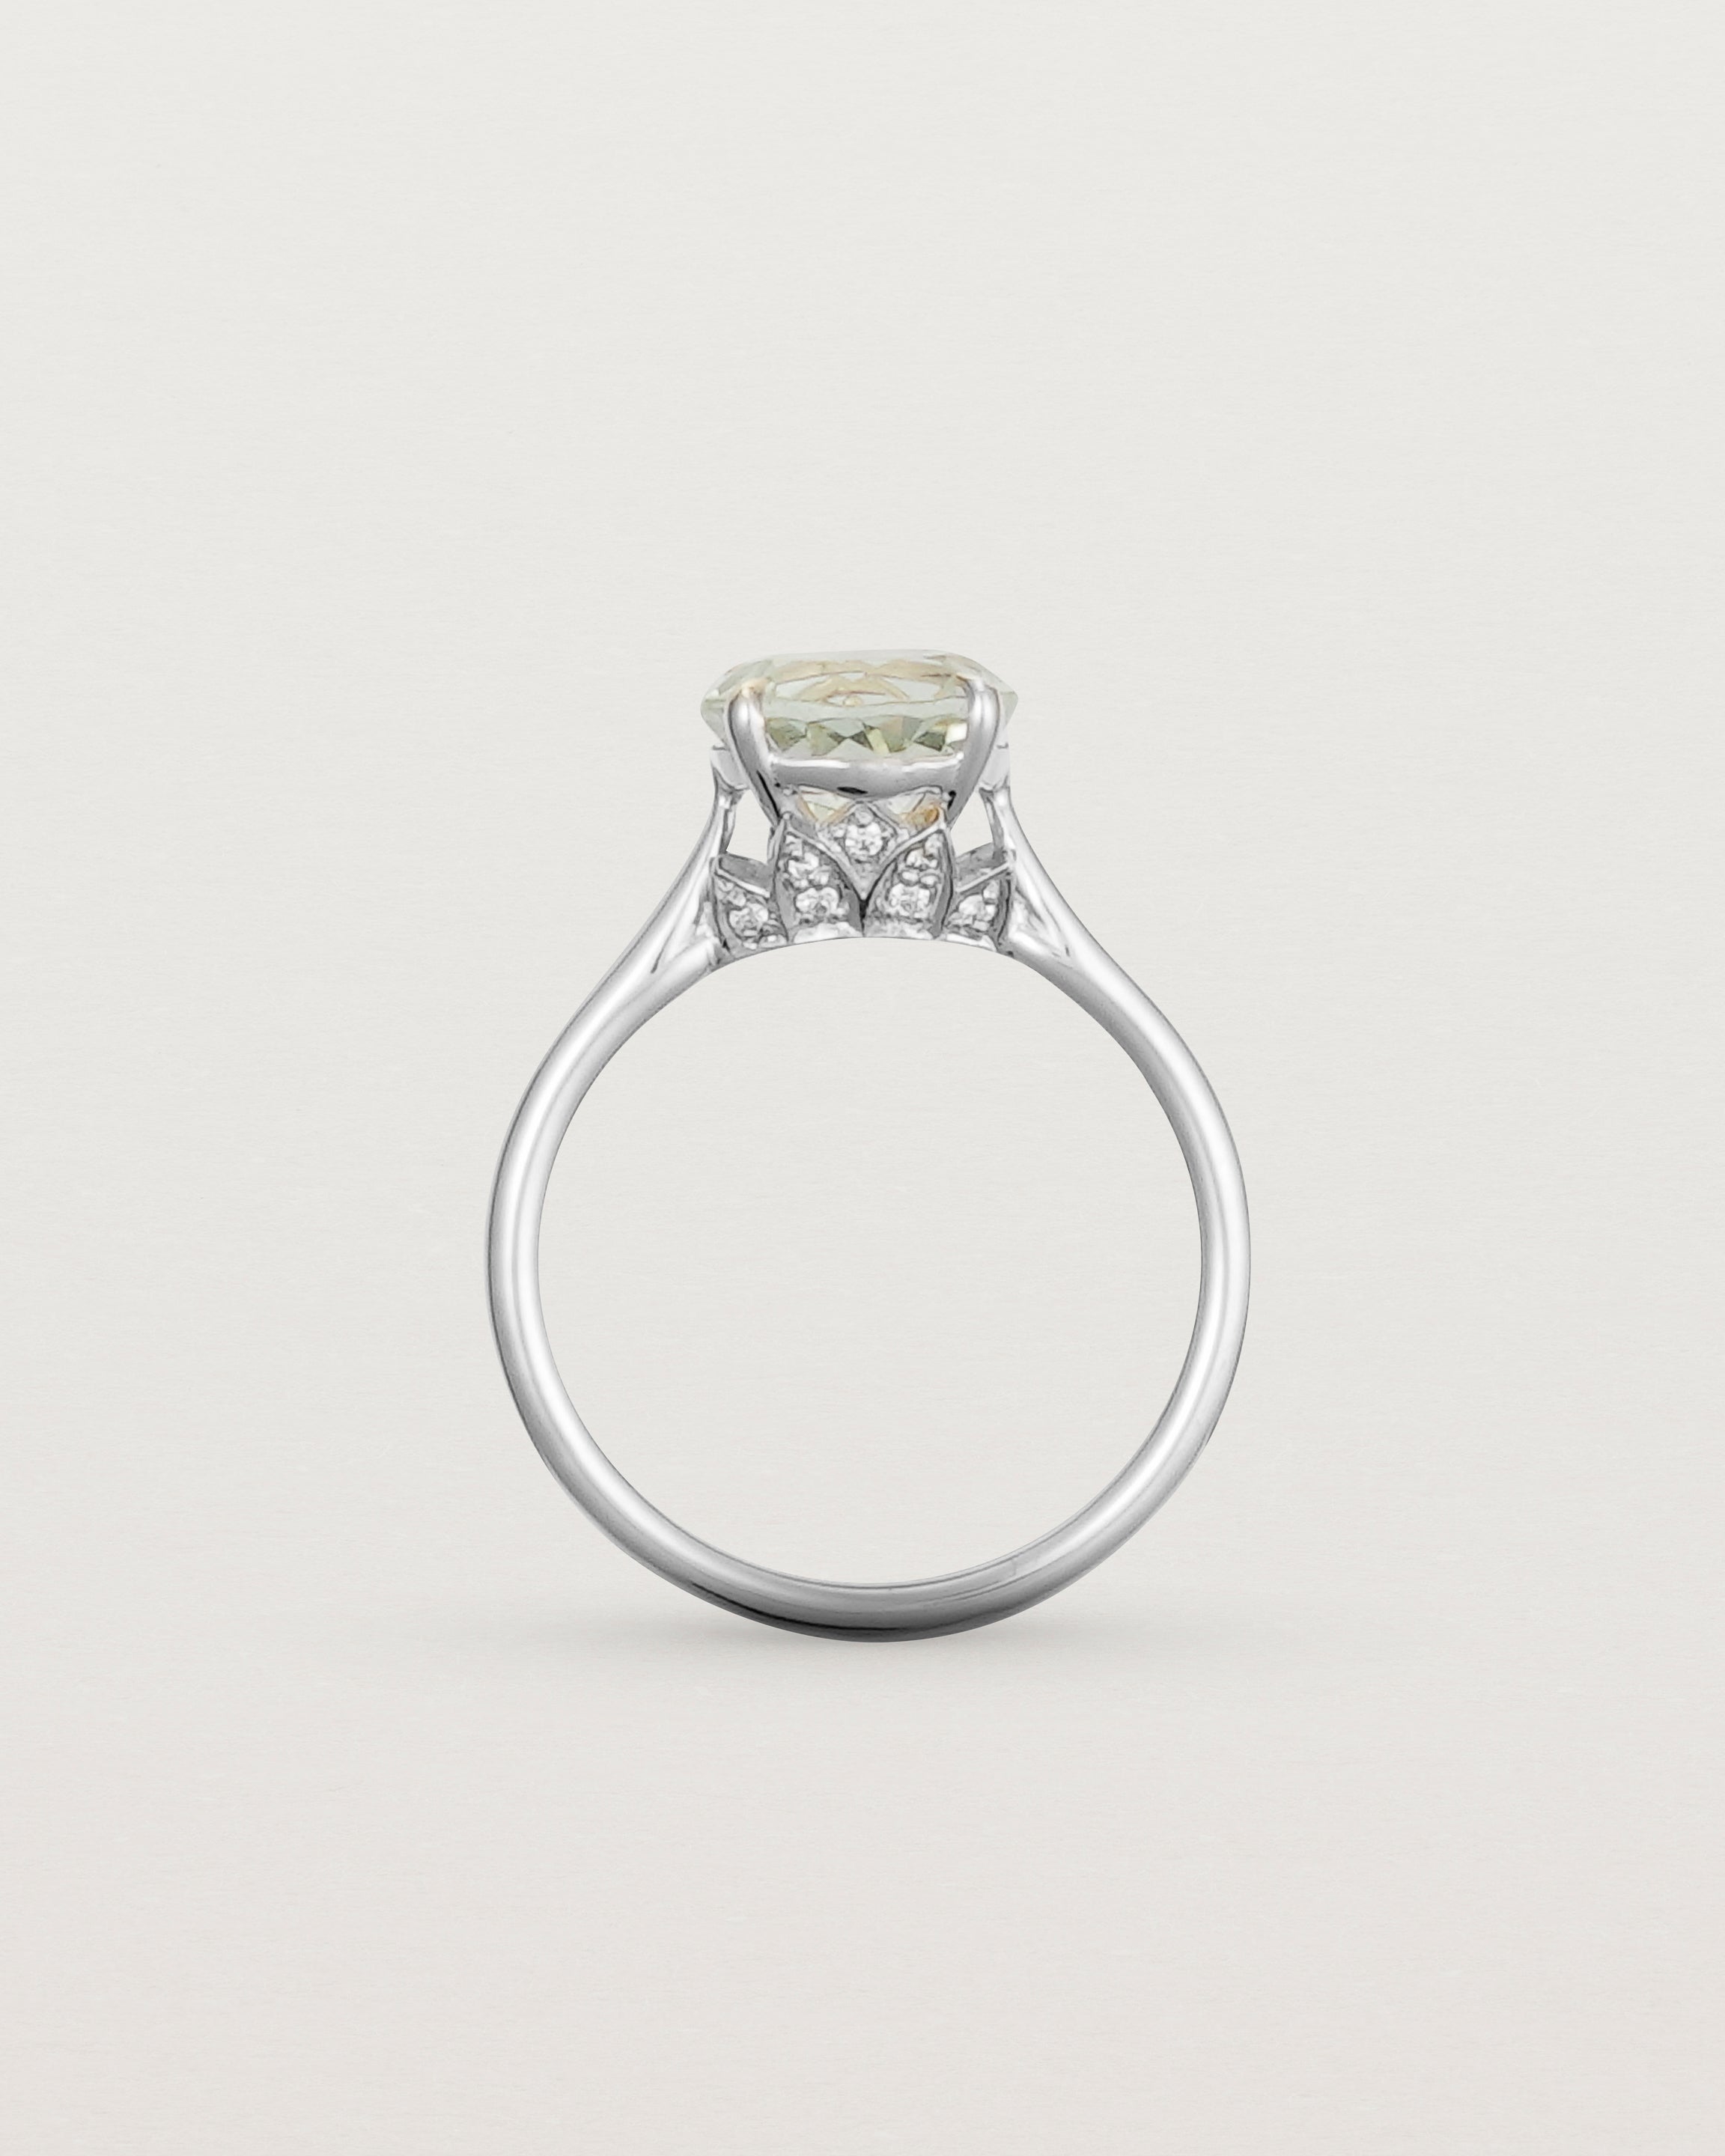 Standing view of the Kalina Round Solitaire | Green Amethyst | White Gold.